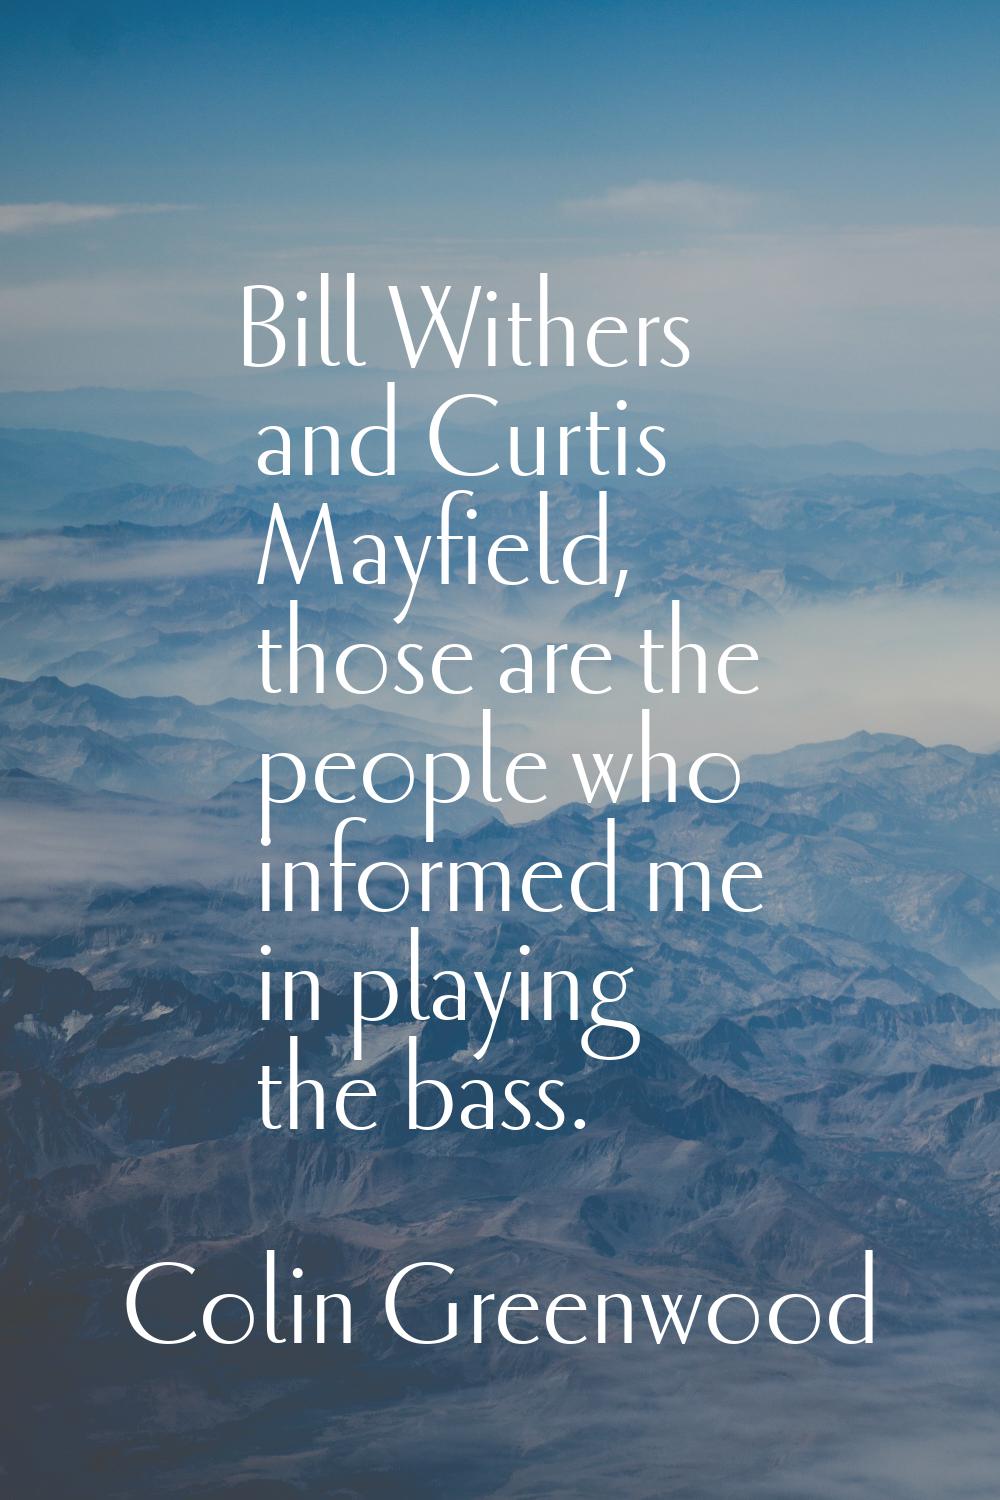 Bill Withers and Curtis Mayfield, those are the people who informed me in playing the bass.